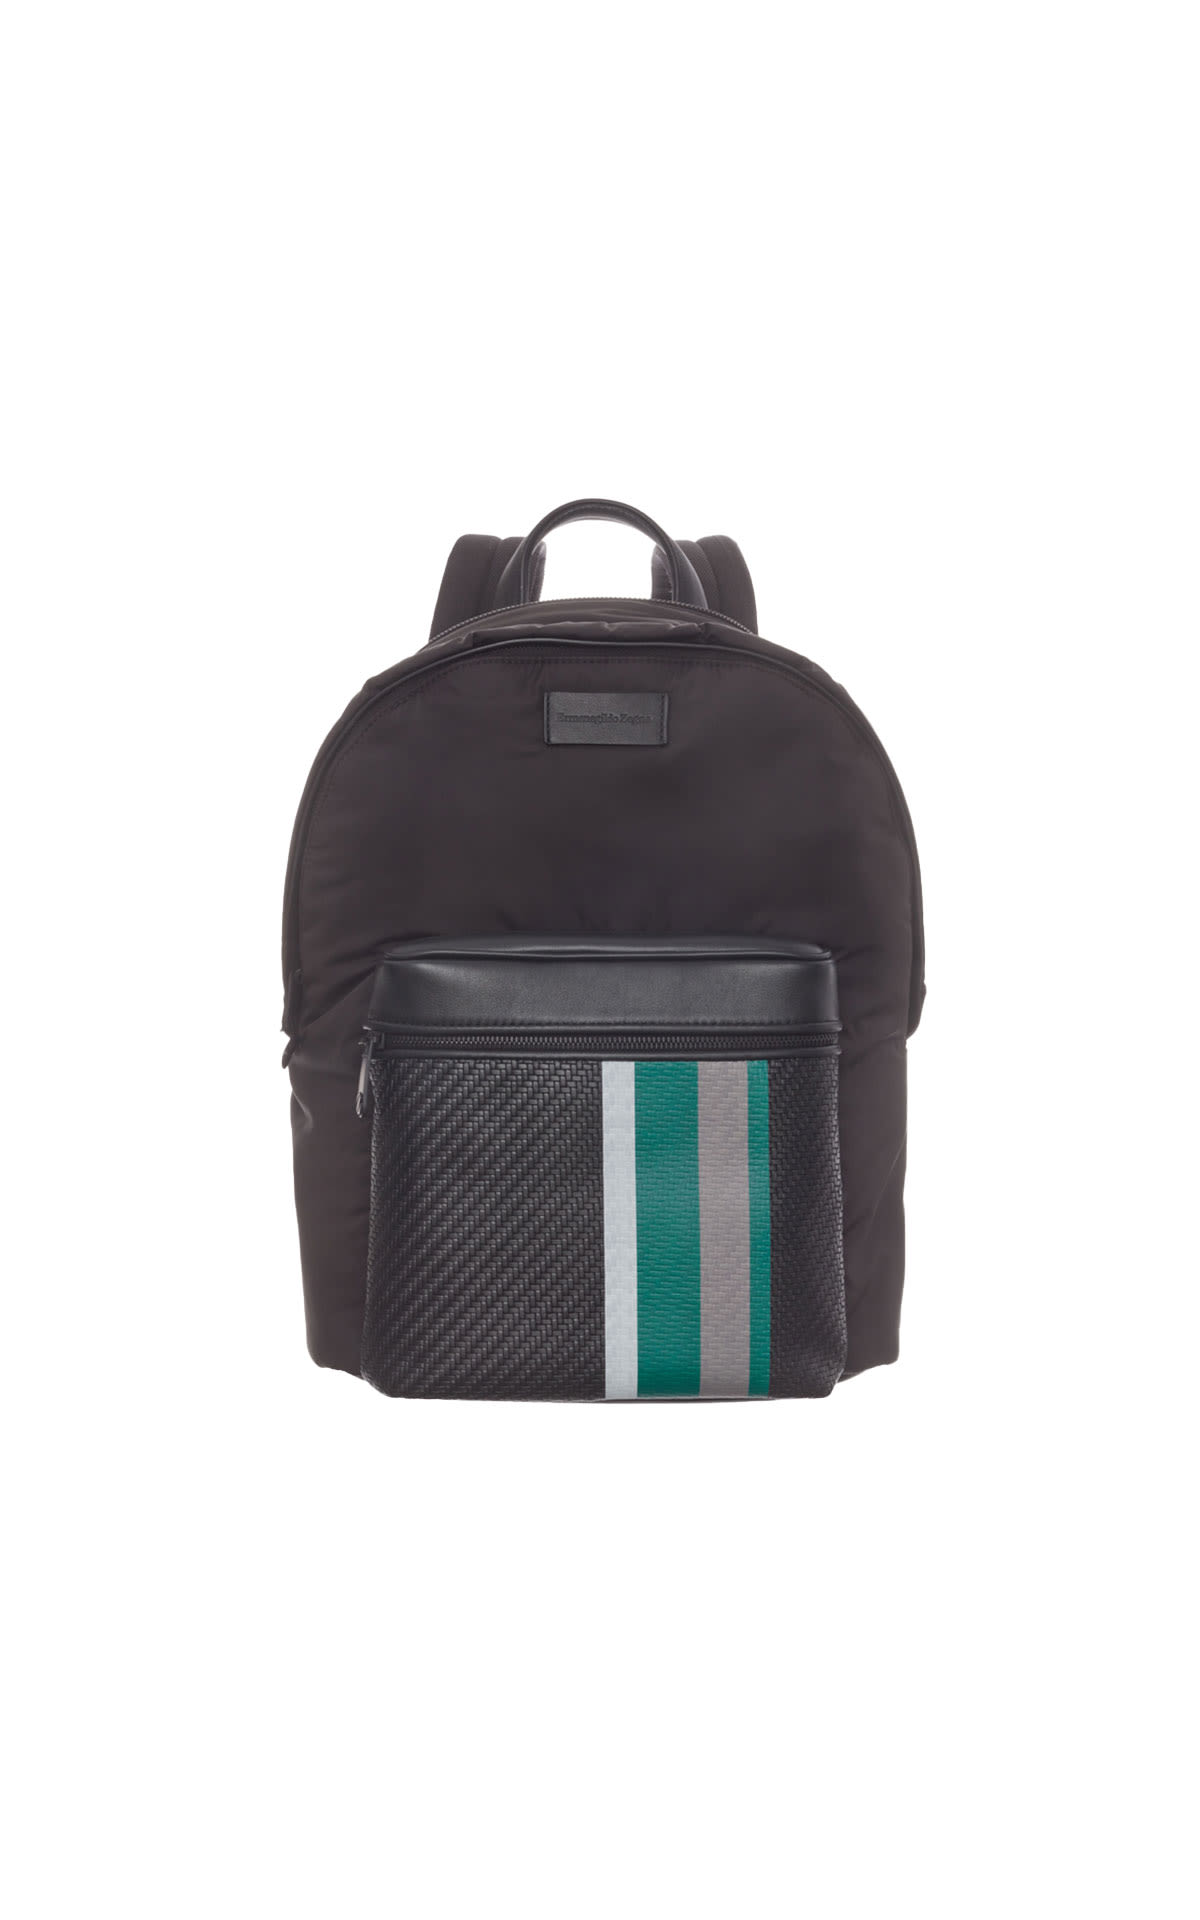 Zegna Leather backpack from Bicester Village